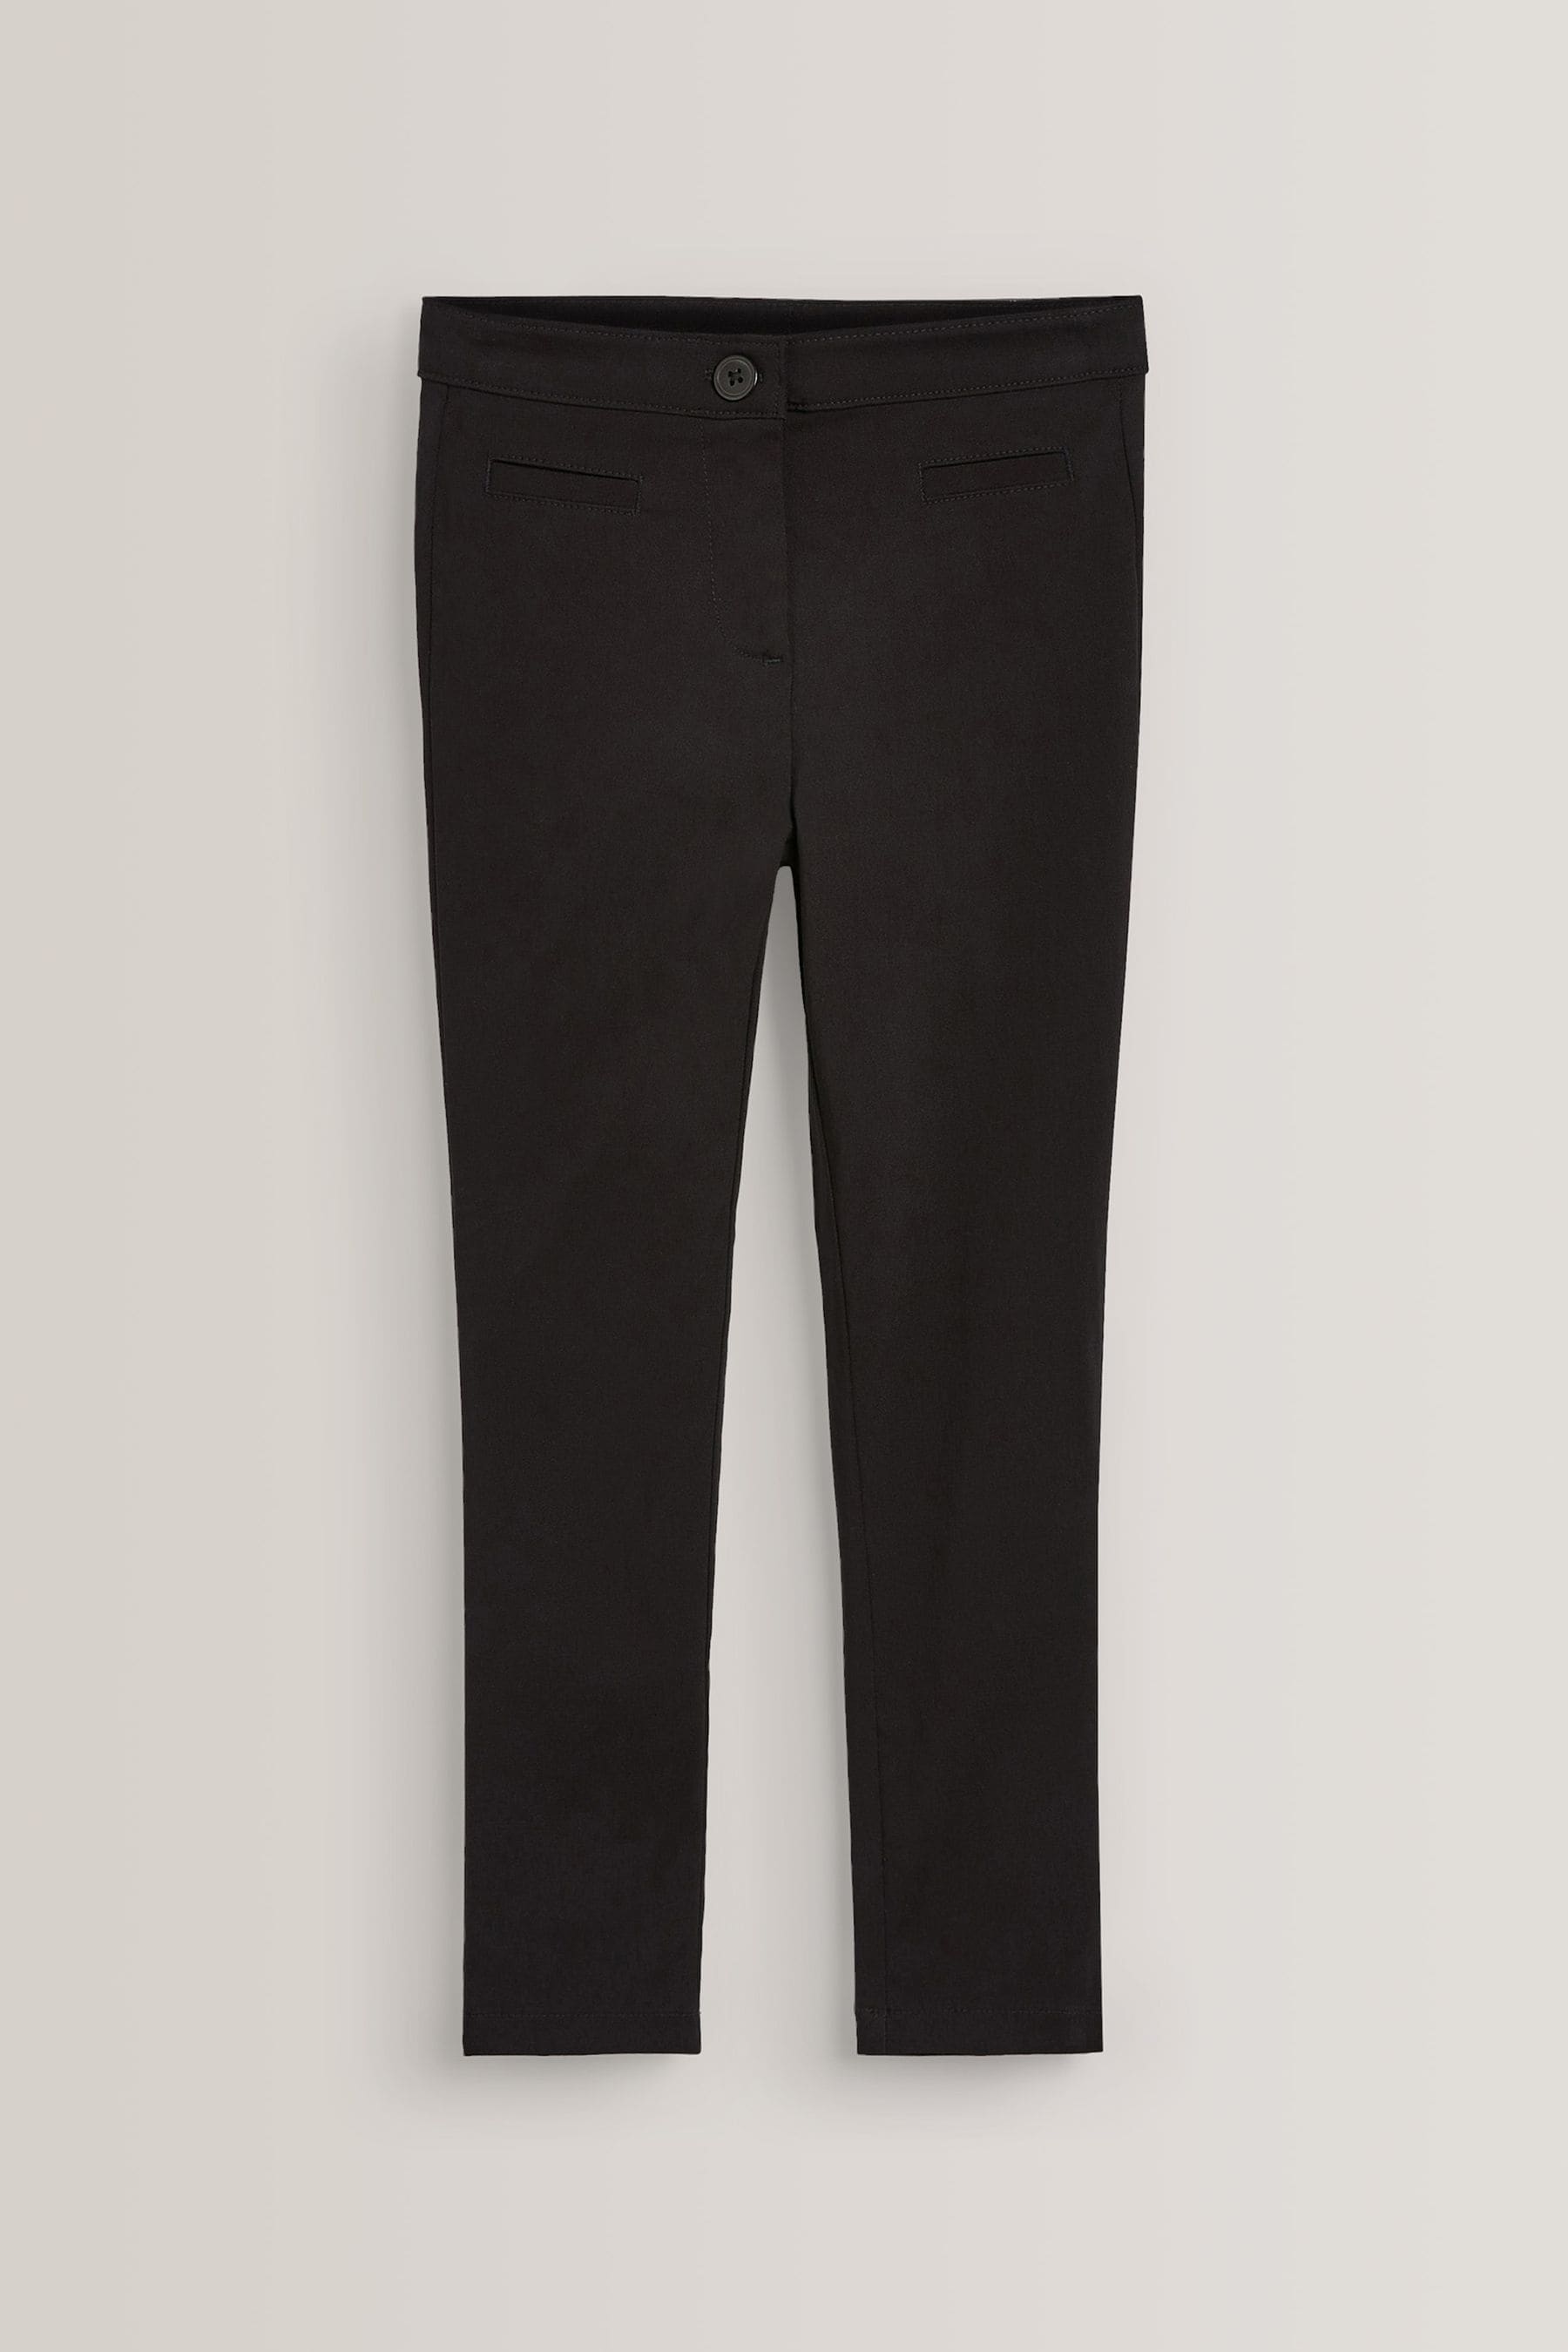 Buy Black 2 Pack Skinny Stretch Trousers (3-17yrs) from the Next UK ...